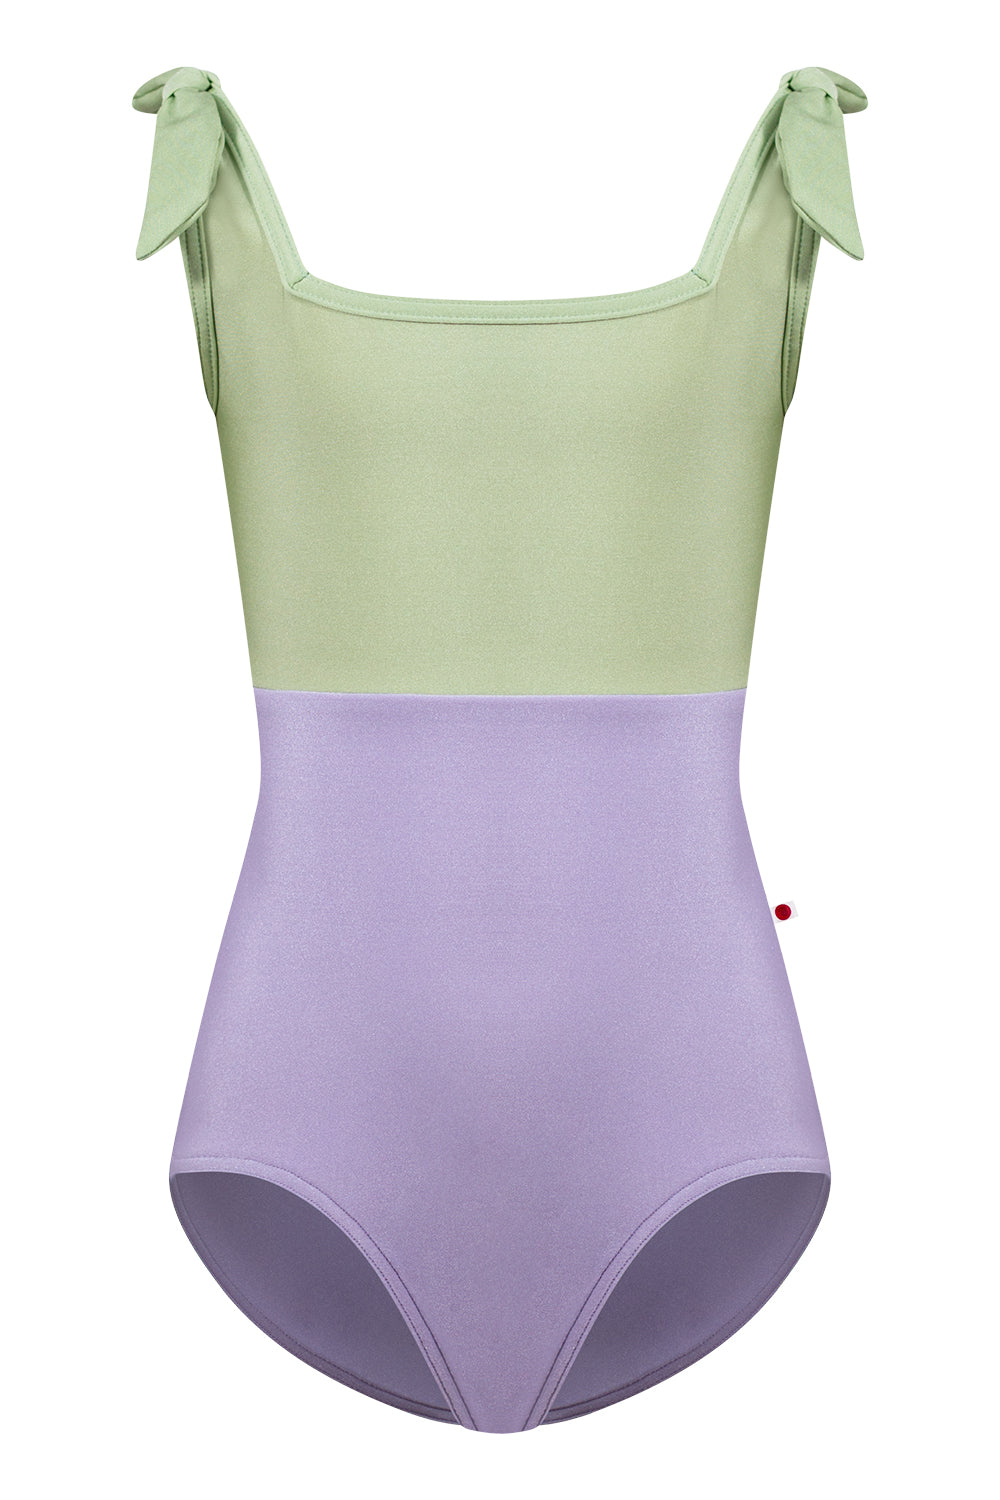 Kids Marieke Duo leotard in N-Poem body color with N-Ginko top & trim color and matching shoulder bows